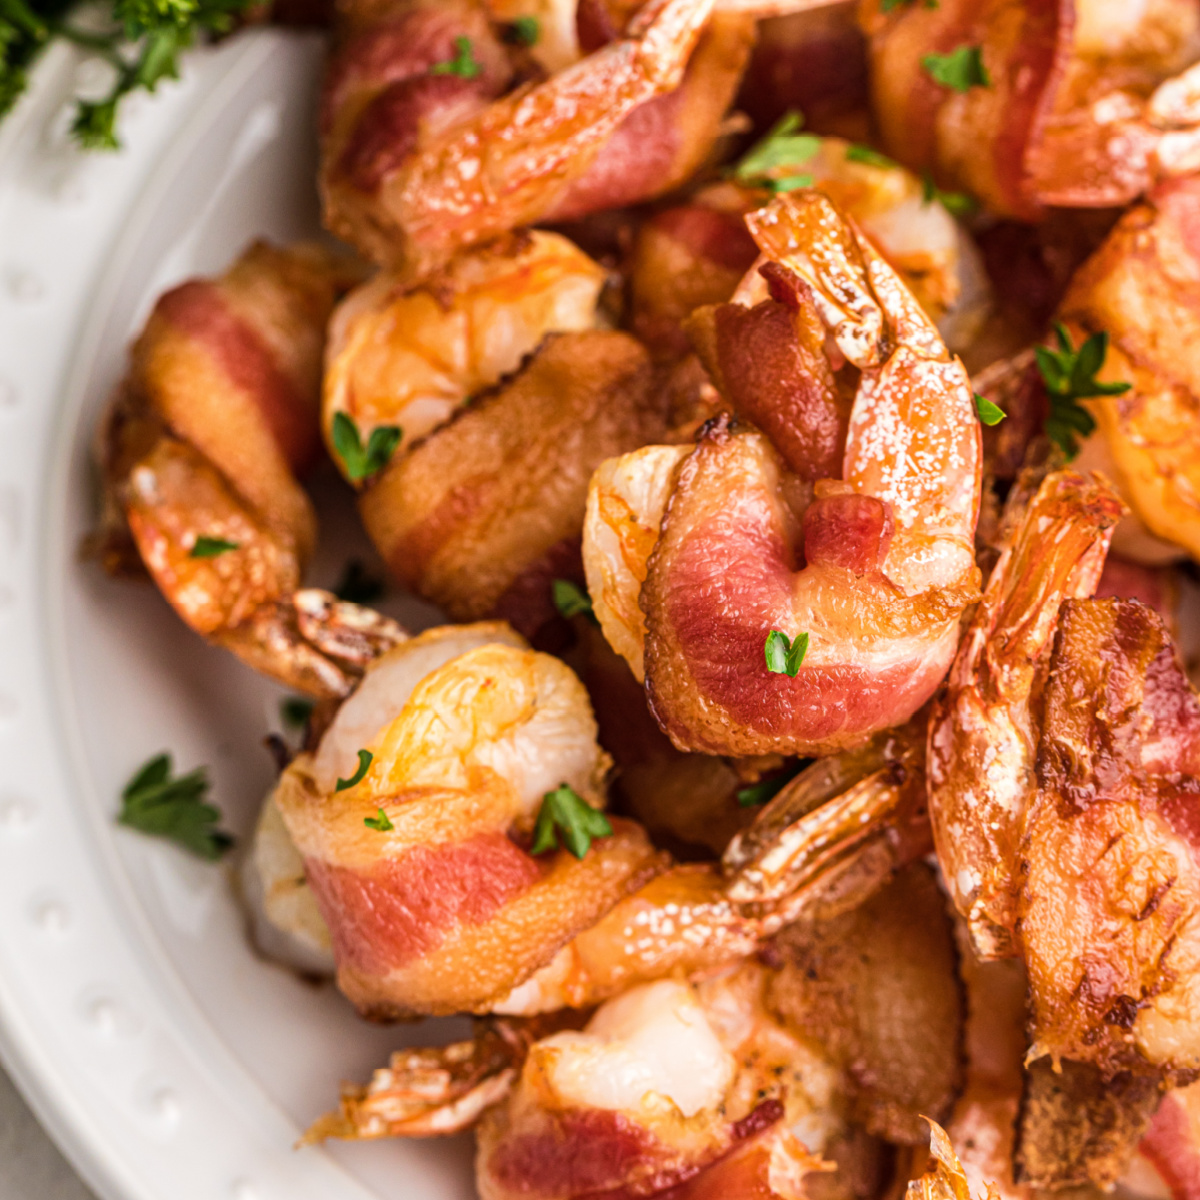 Bacon Wrapped Shrimp made in the air fryer on a white plate ready to serve.